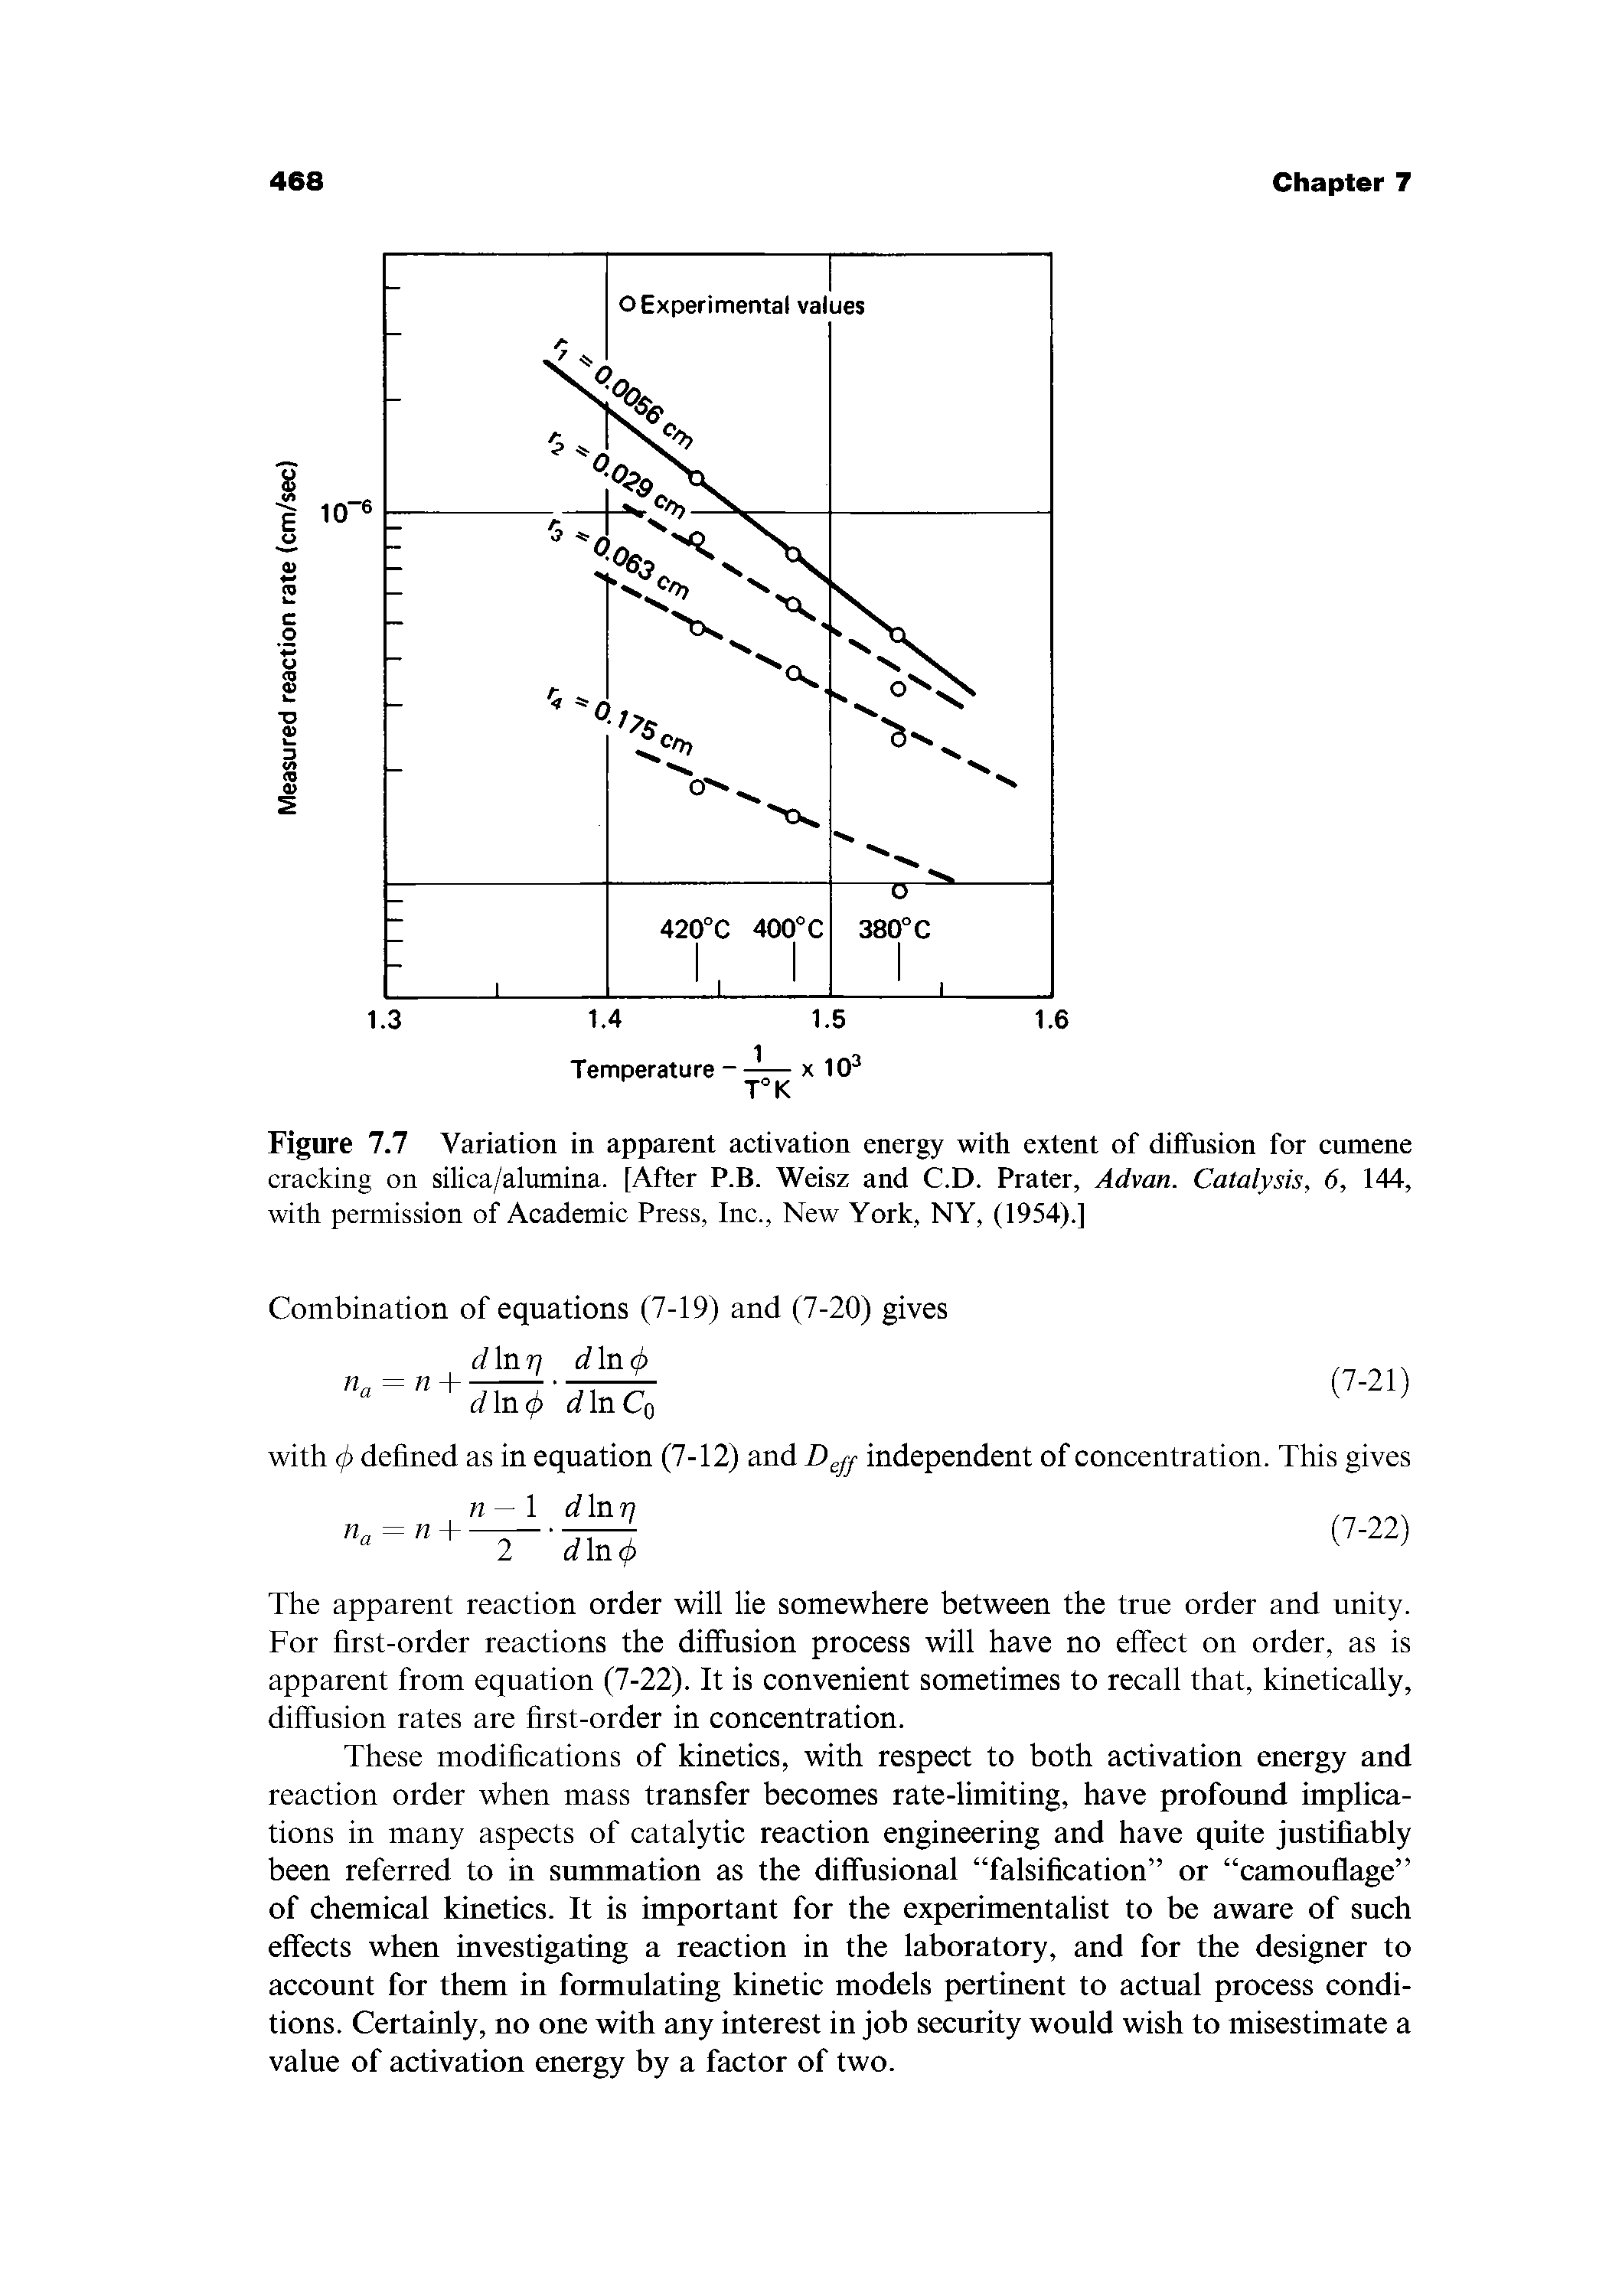 Figure 7.7 Variation in apparent activation energy with extent of diffusion for cumene cracking on silica/alumina. [After P.B. Weisz and C.D. Prater, Advan. Catalysis, 6, 144, with permission of Academic Press, Inc., New York, NY, (1954).]...